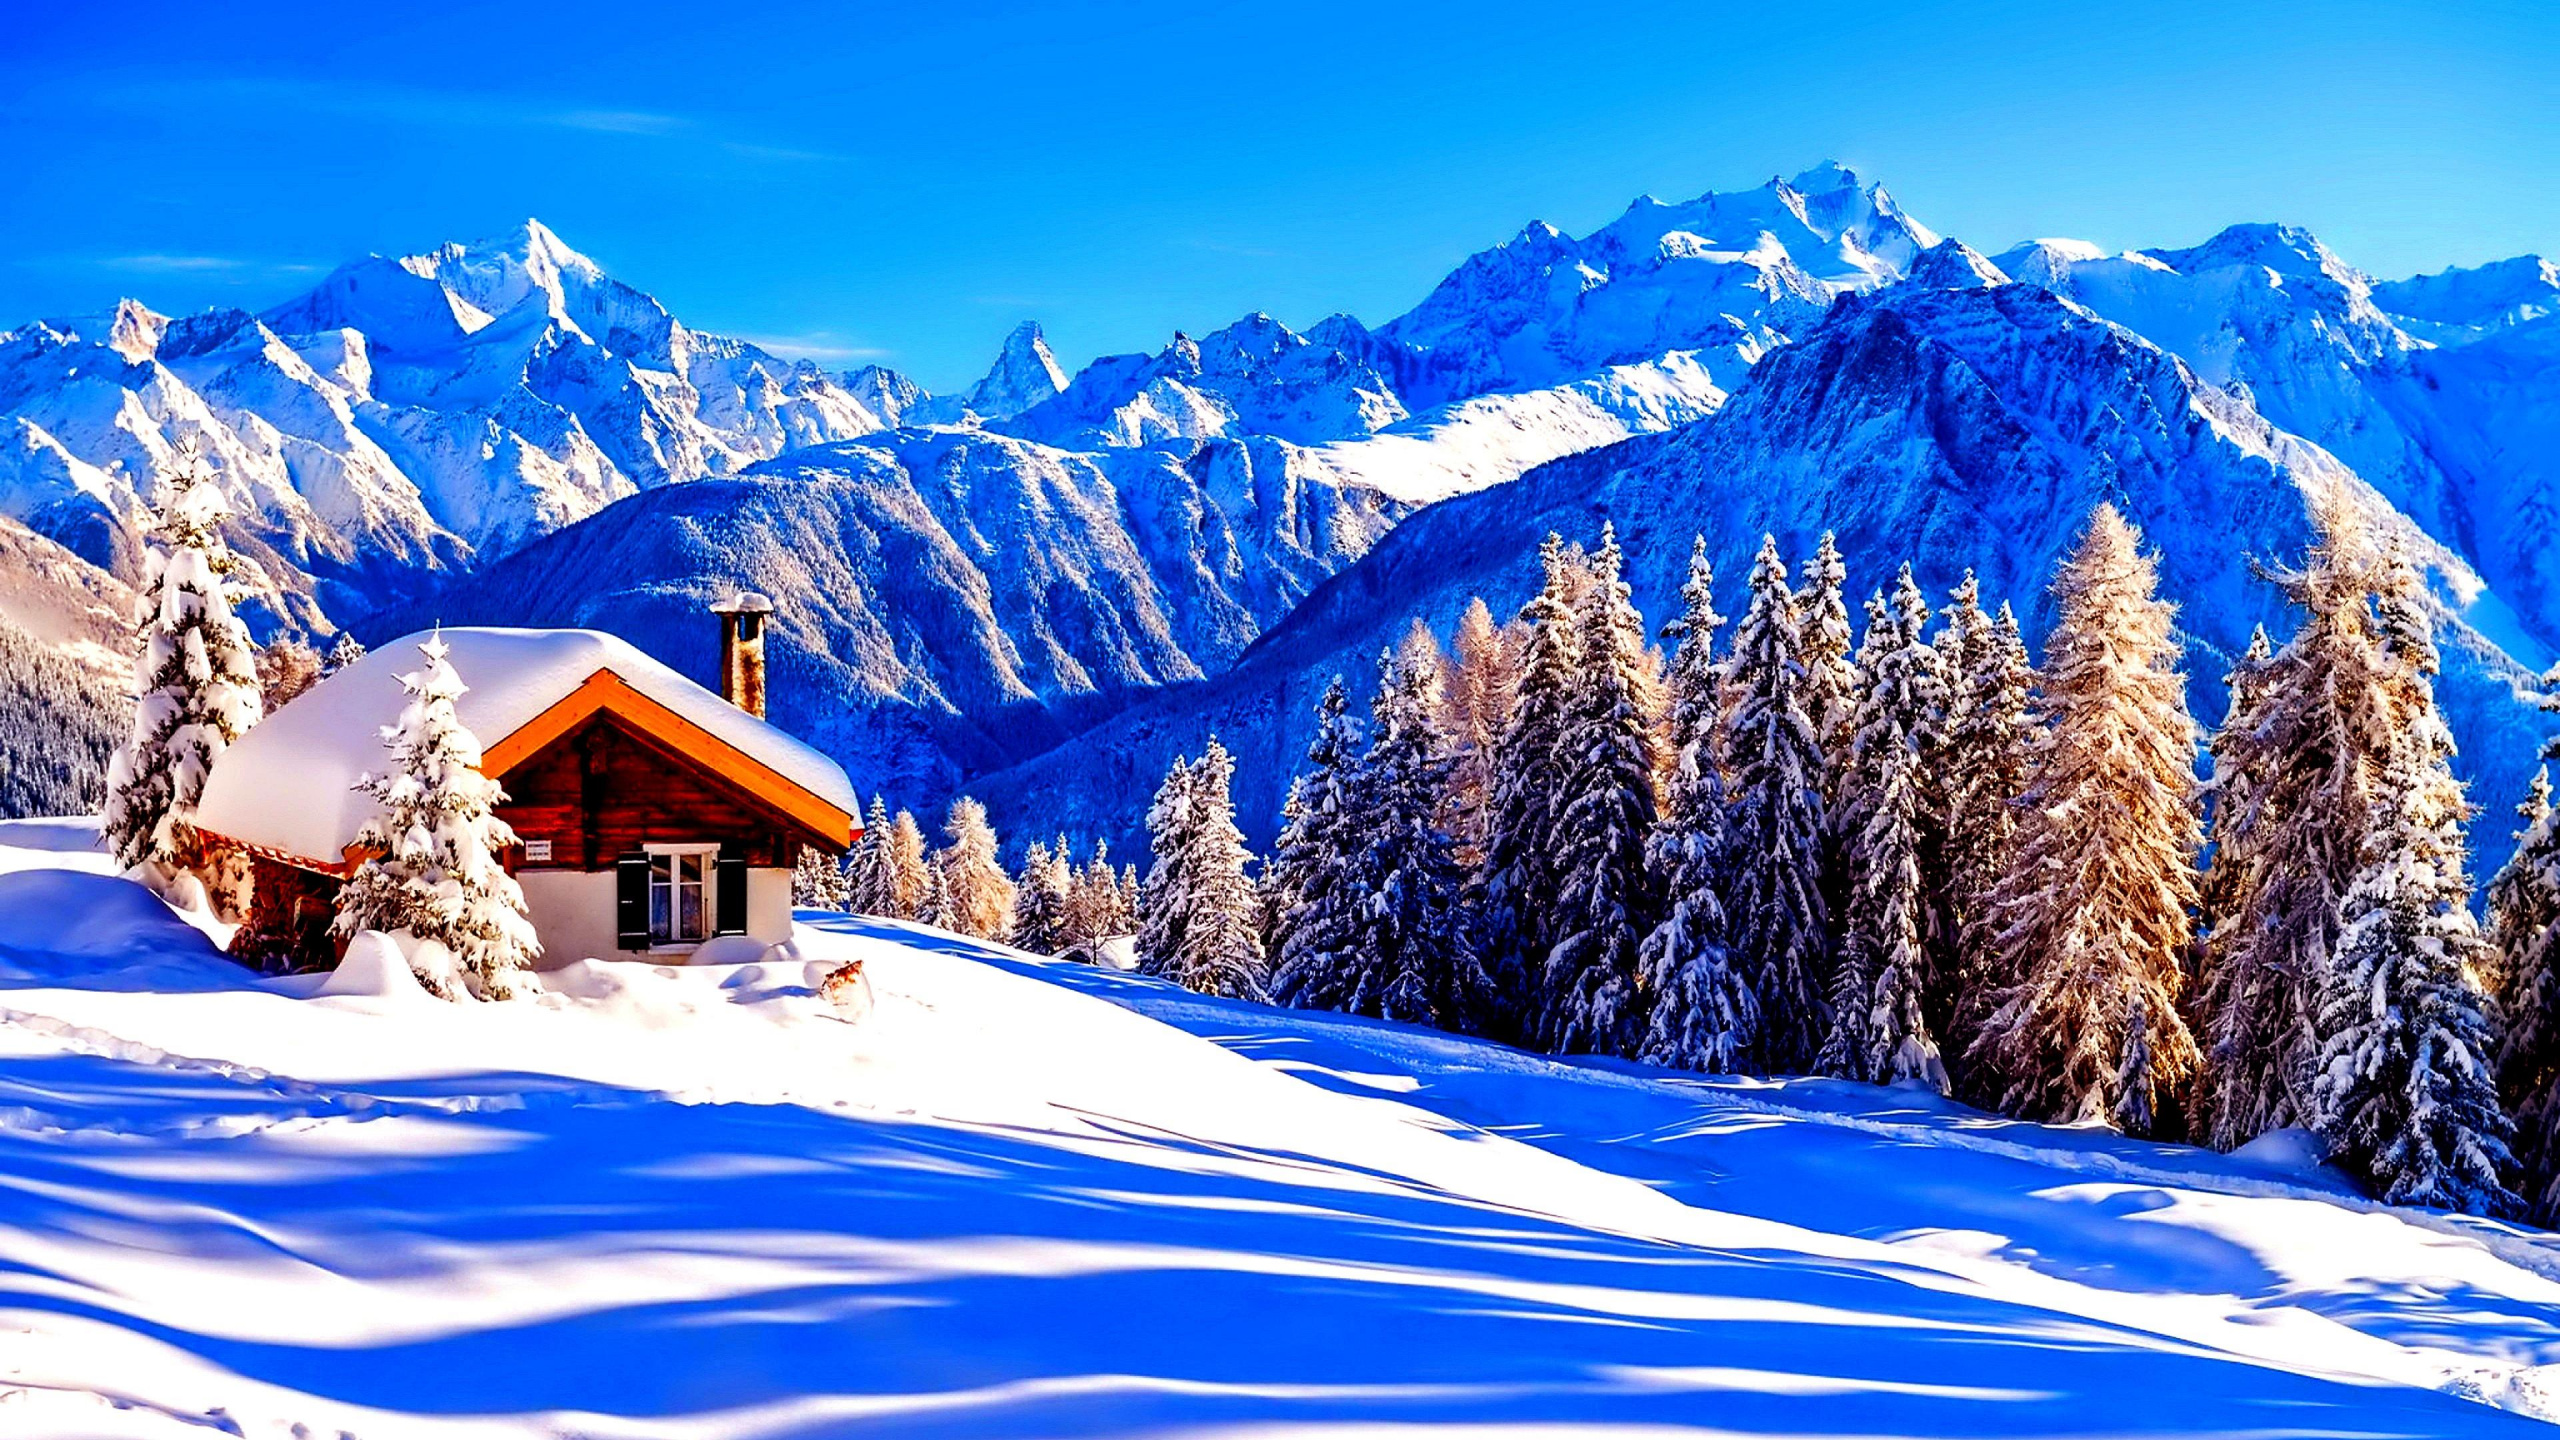 Brown Wooden House on Snow Covered Mountain During Daytime. Wallpaper in 2560x1440 Resolution